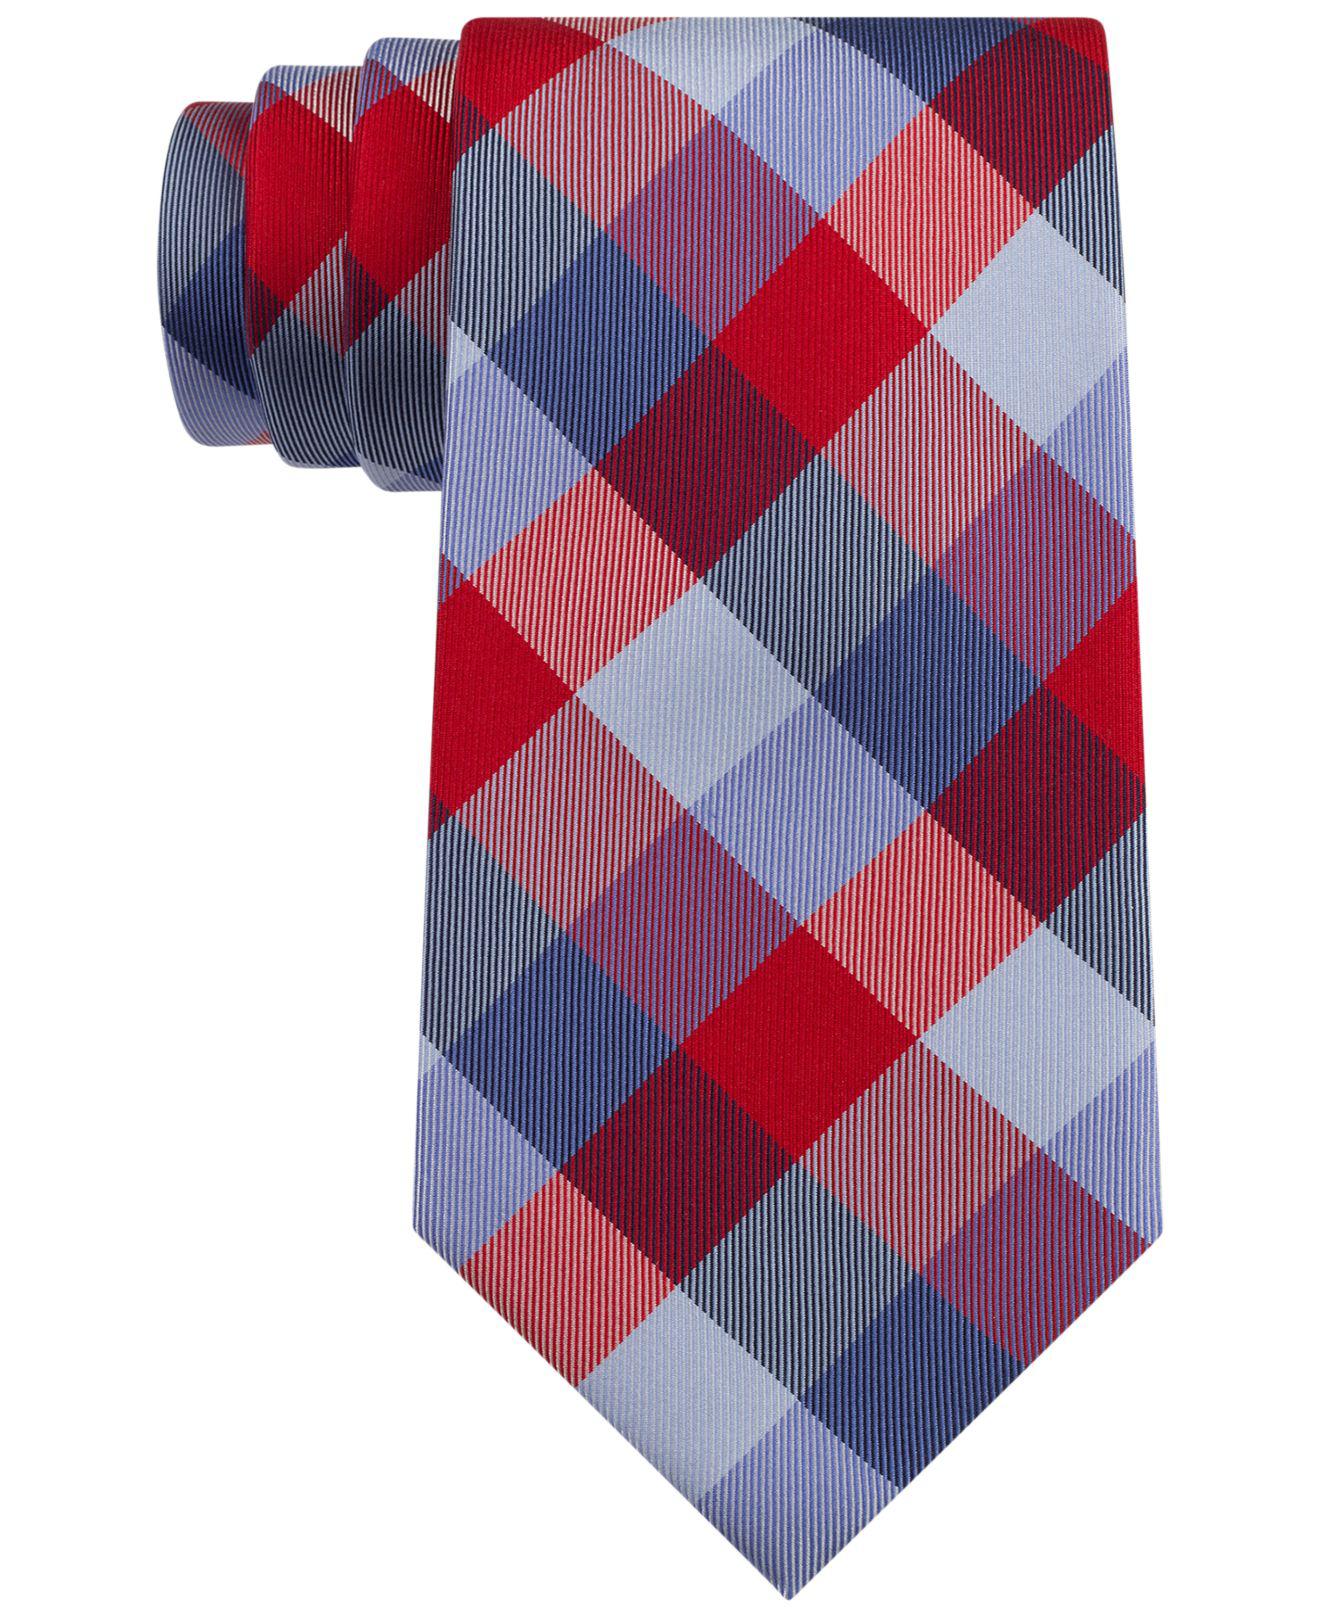 Tommy Hilfiger Silk Buffalo Tartan Tie in Red/Blue (Red) for Men - Save ...